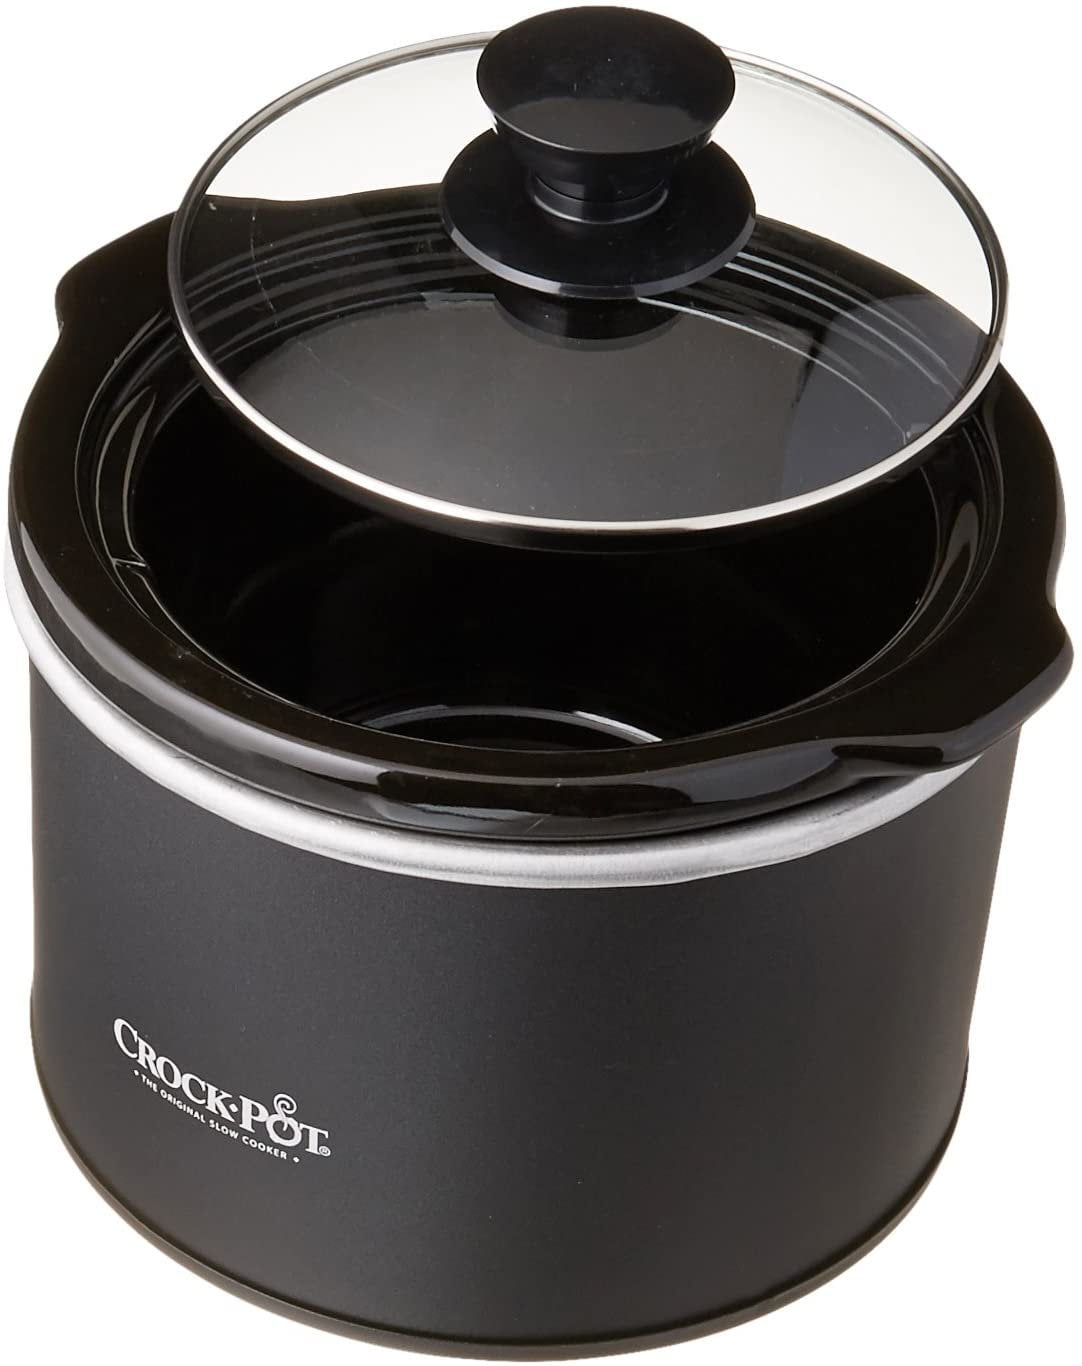 Review of the Crock-Pot 2-Quart Round Manual Slow Cooker+ 